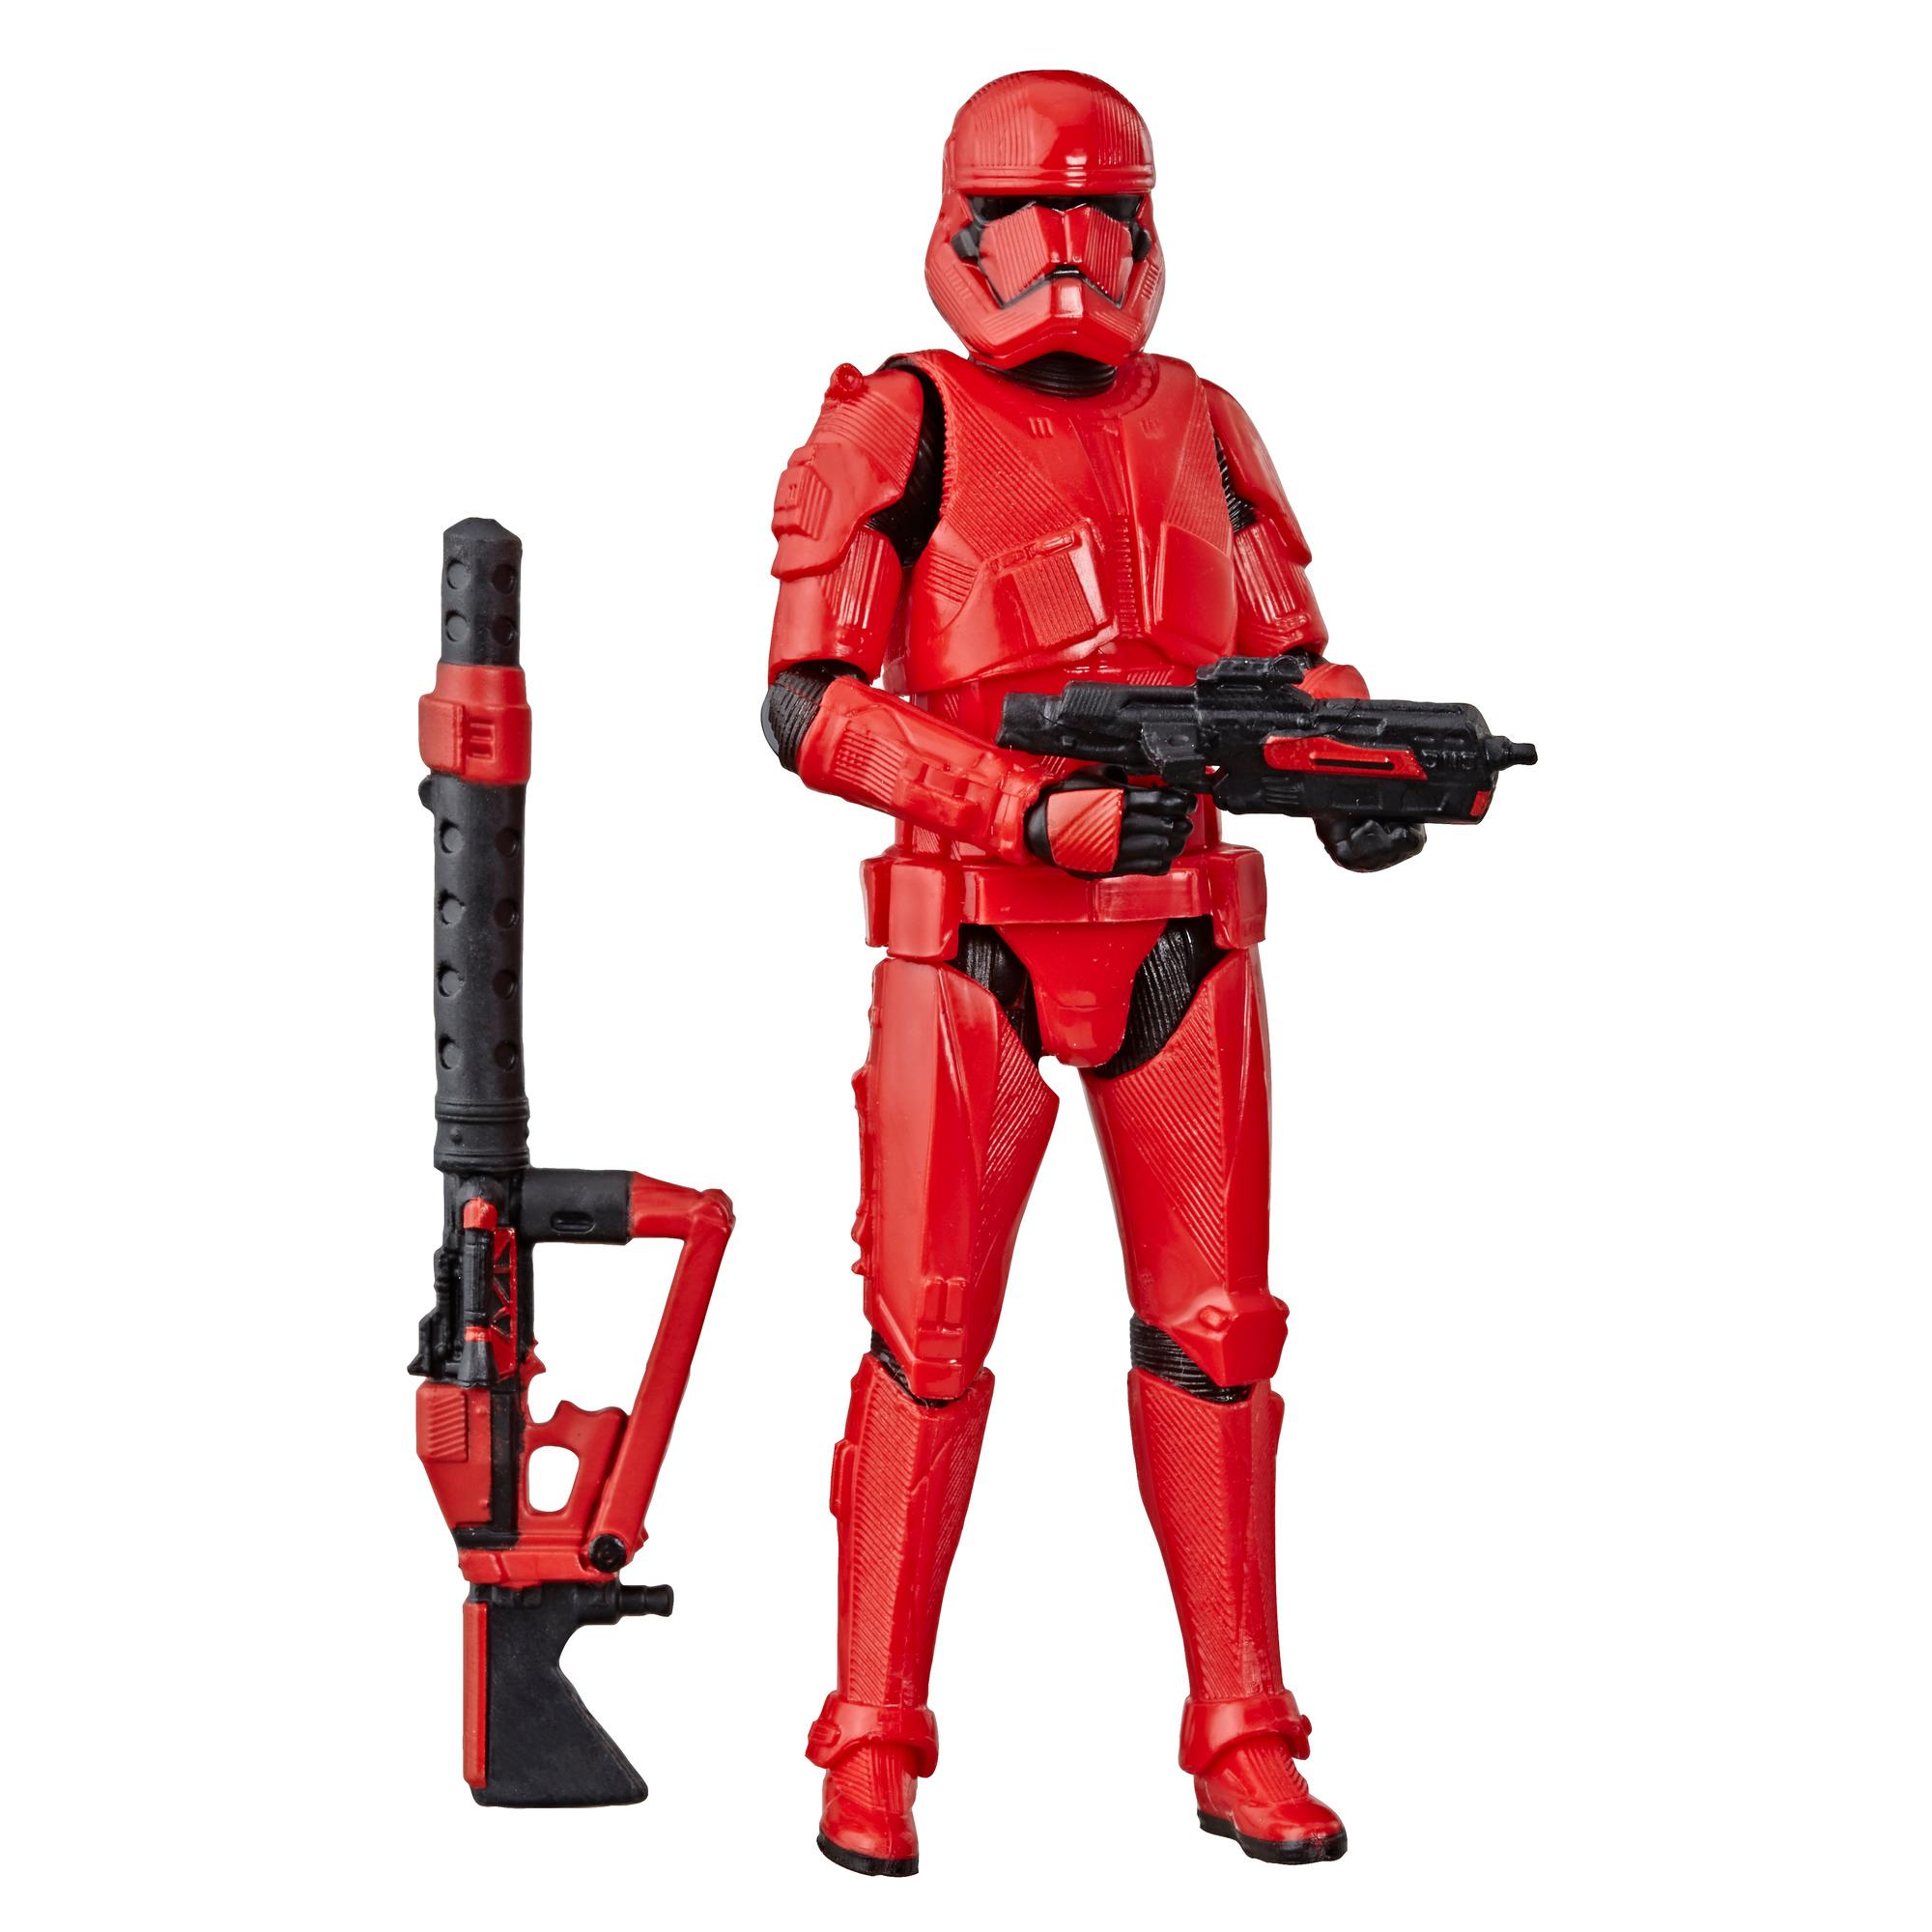 Star Wars The Vintage Collection Star Wars: The Rise of Skywalker Sith Trooper Toy, 3.75-inch Scale Action Figure